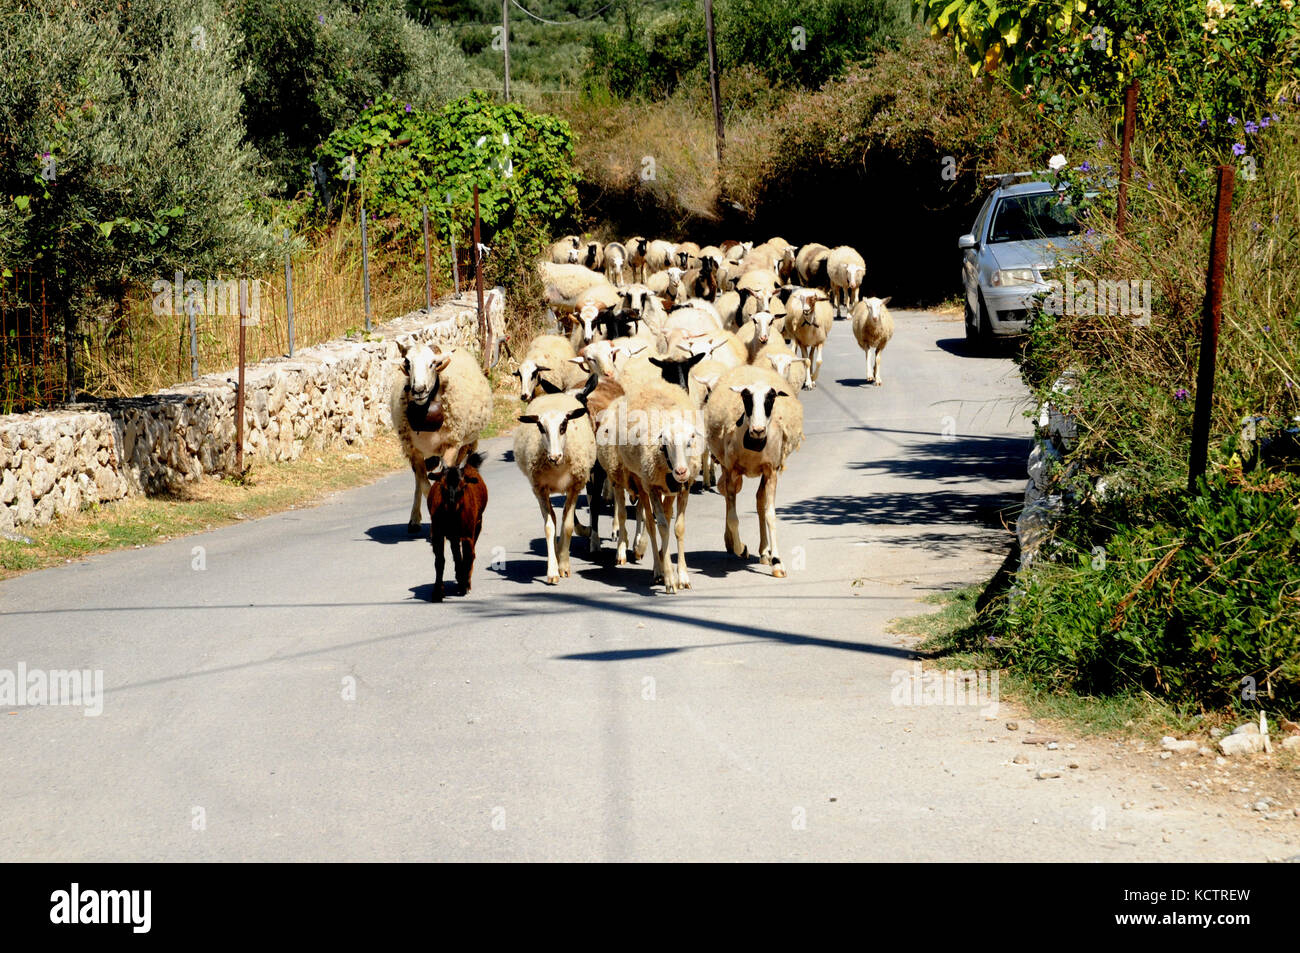 A flock of sheep wend their way along a rural road near Lake Kournas in Crete - another hazard for tourists driving on Crete's rural roads. Stock Photo